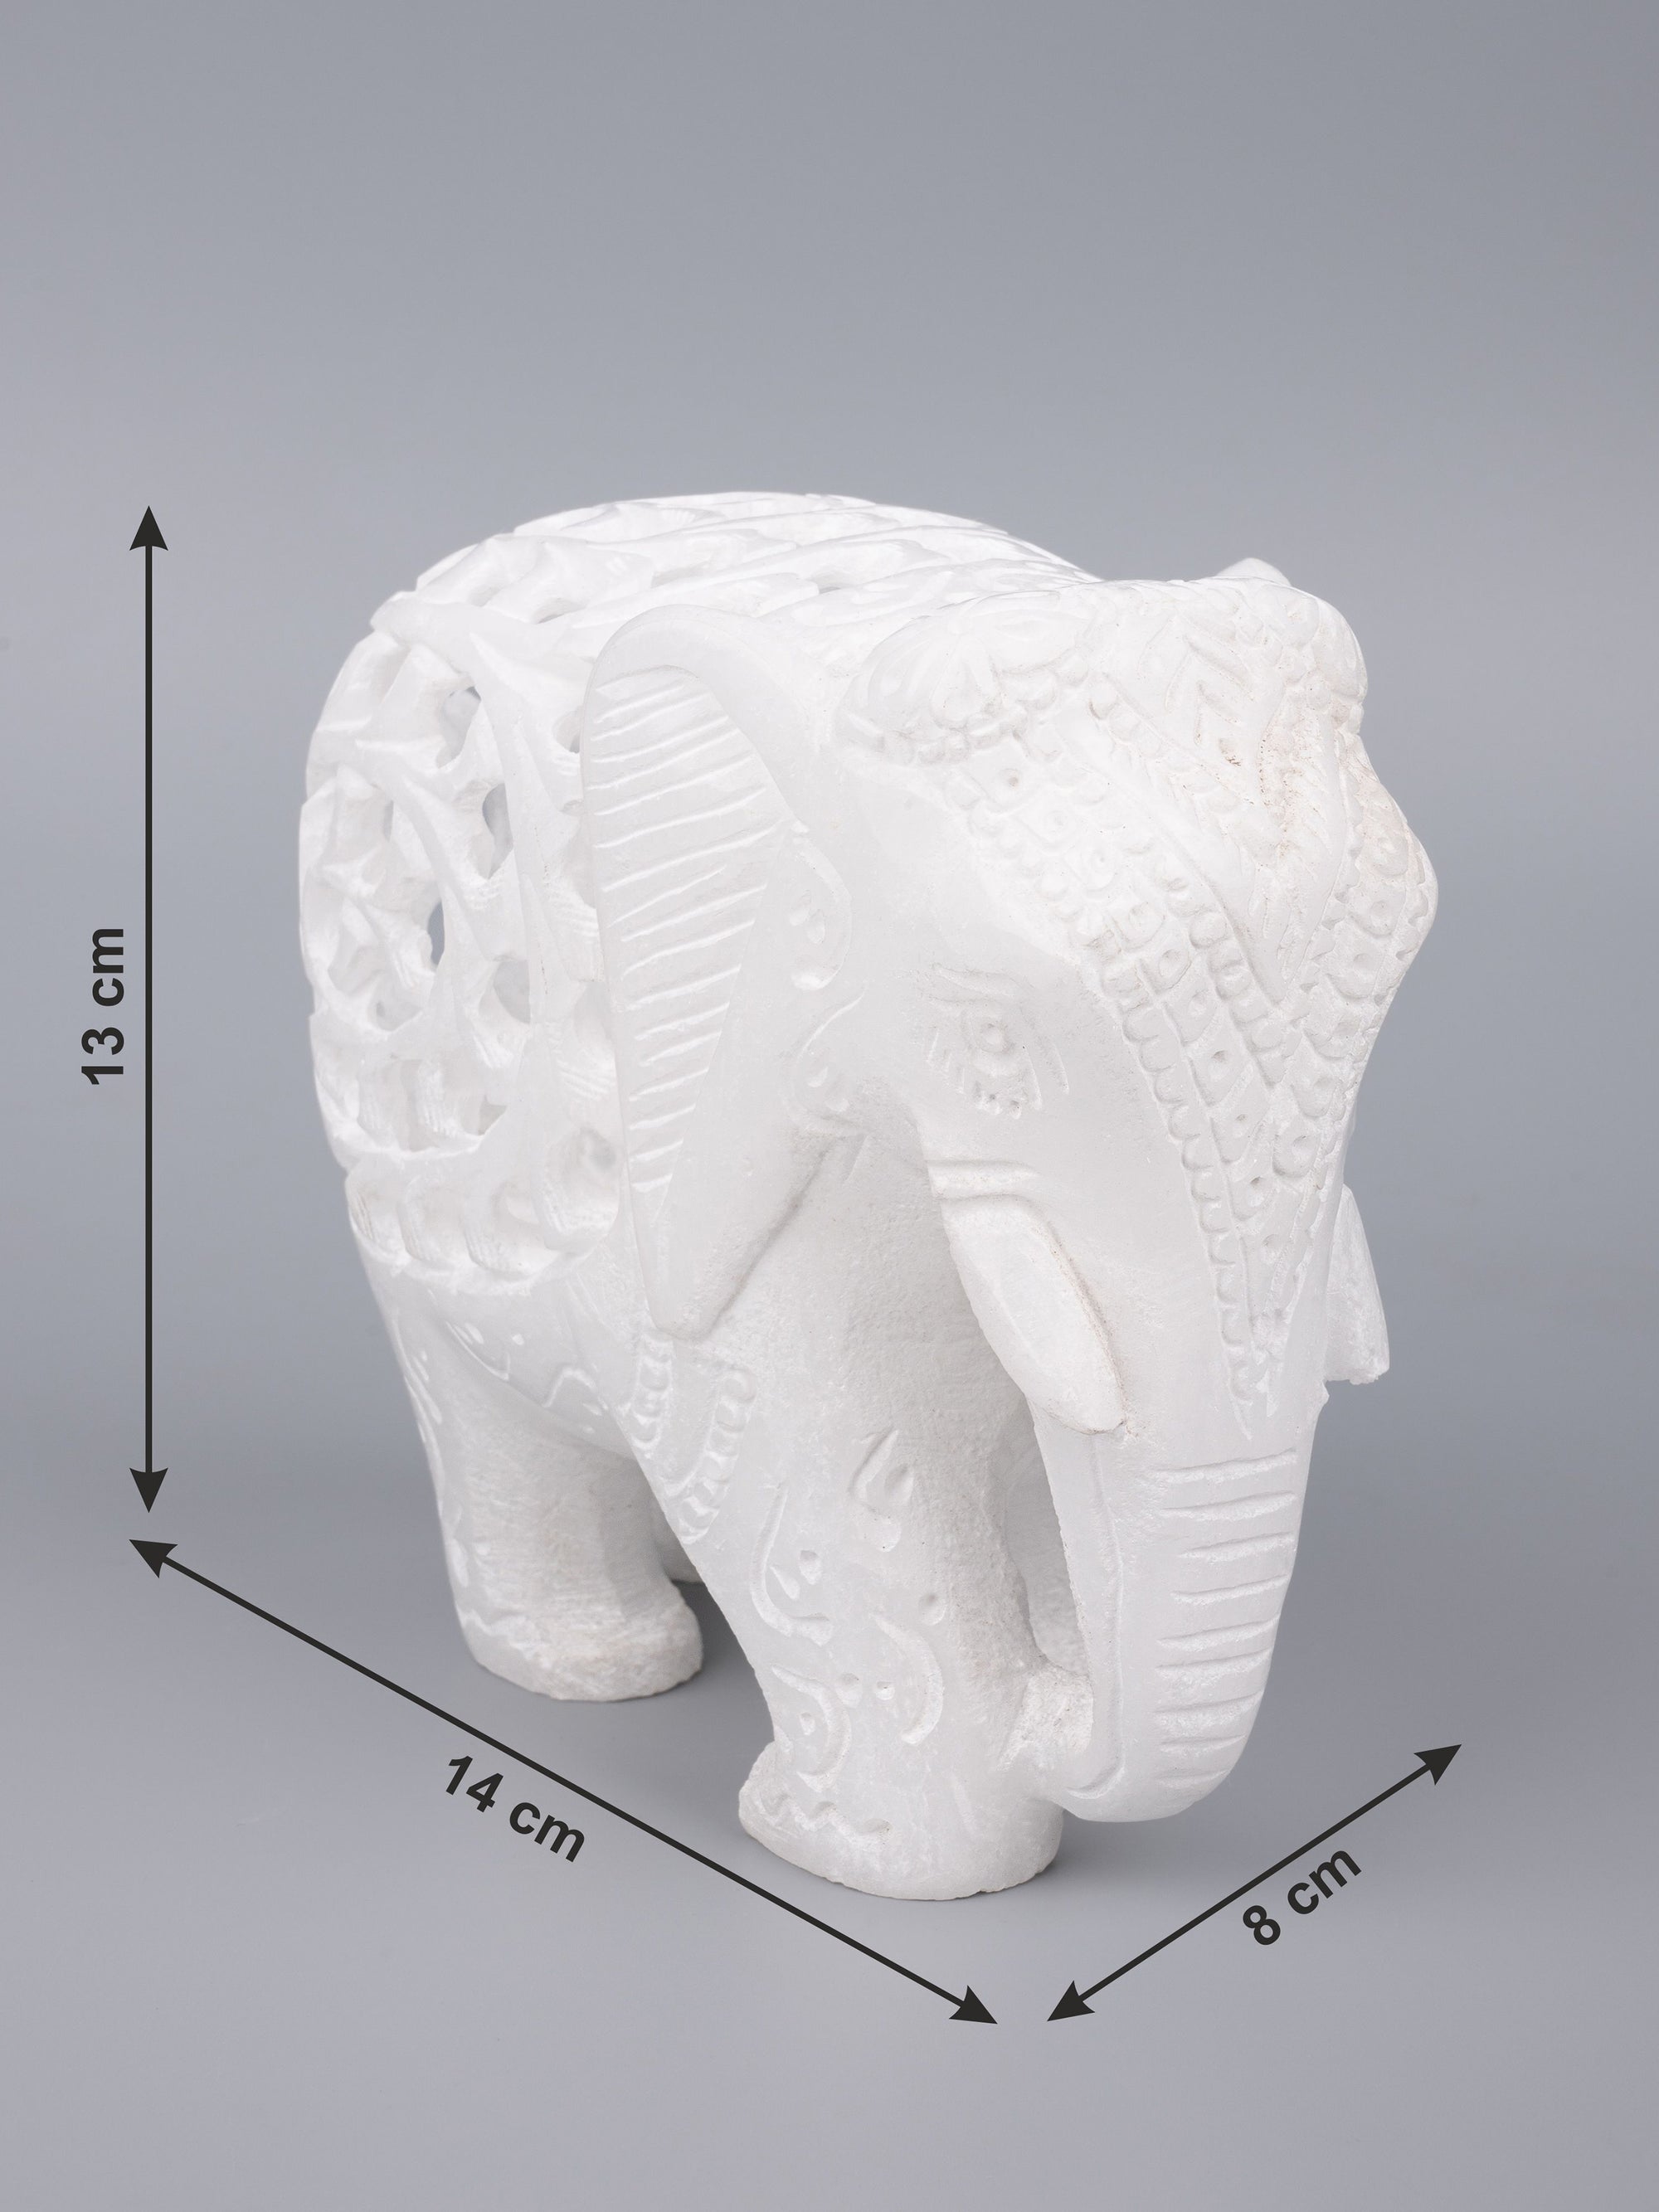 Decorative marble elephant with jali carving in pure white color - The Heritage Artifacts